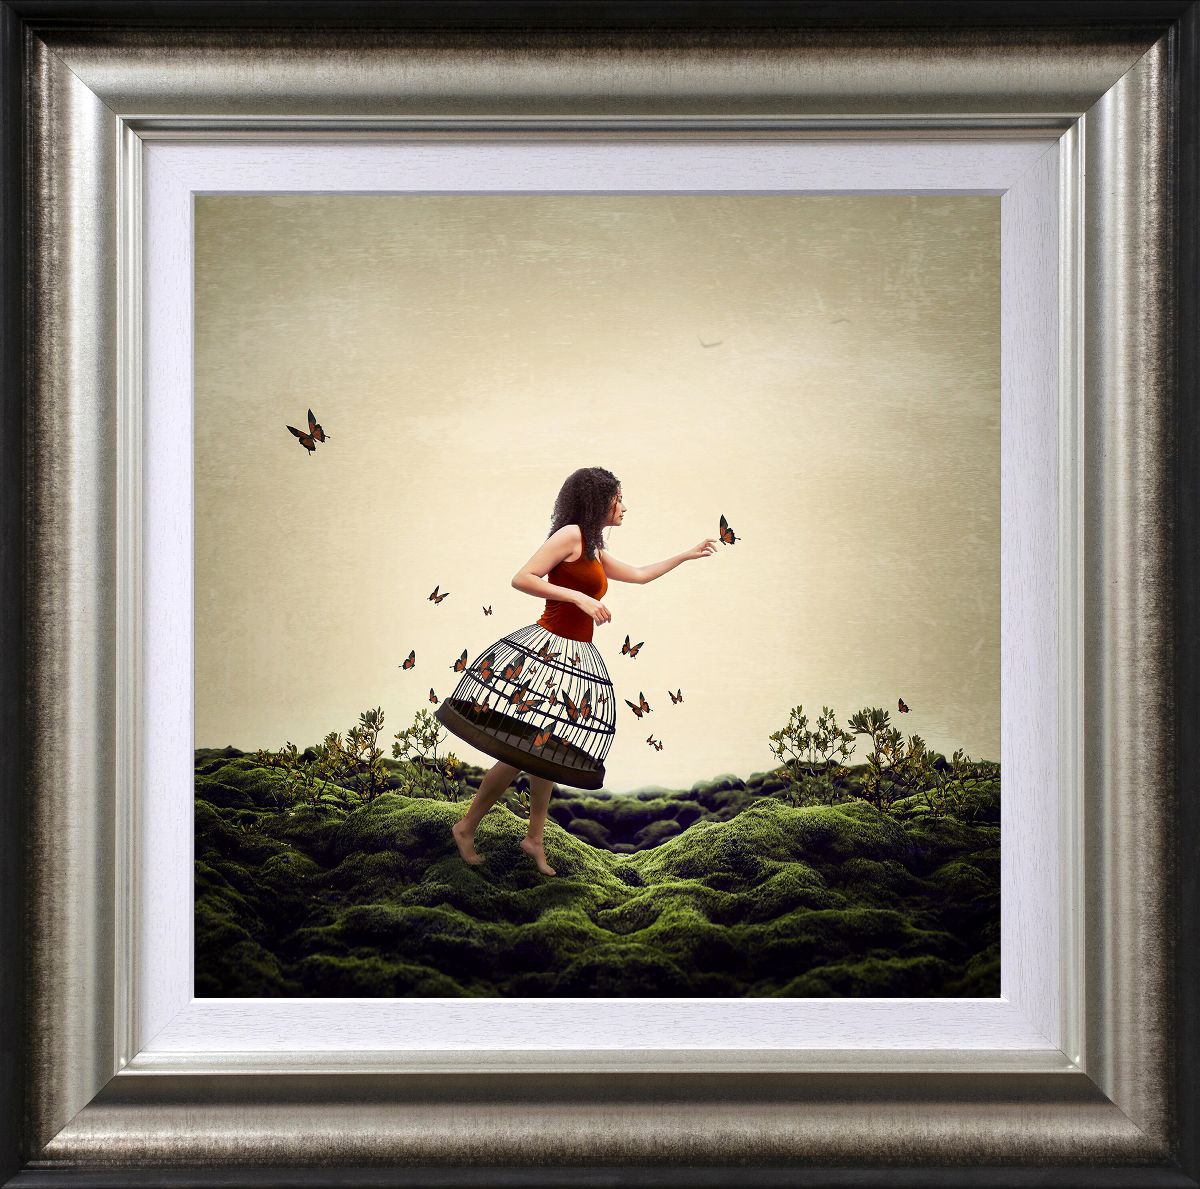 Michelle Mackie - 'Enchanted' - Framed Limited Edition Art